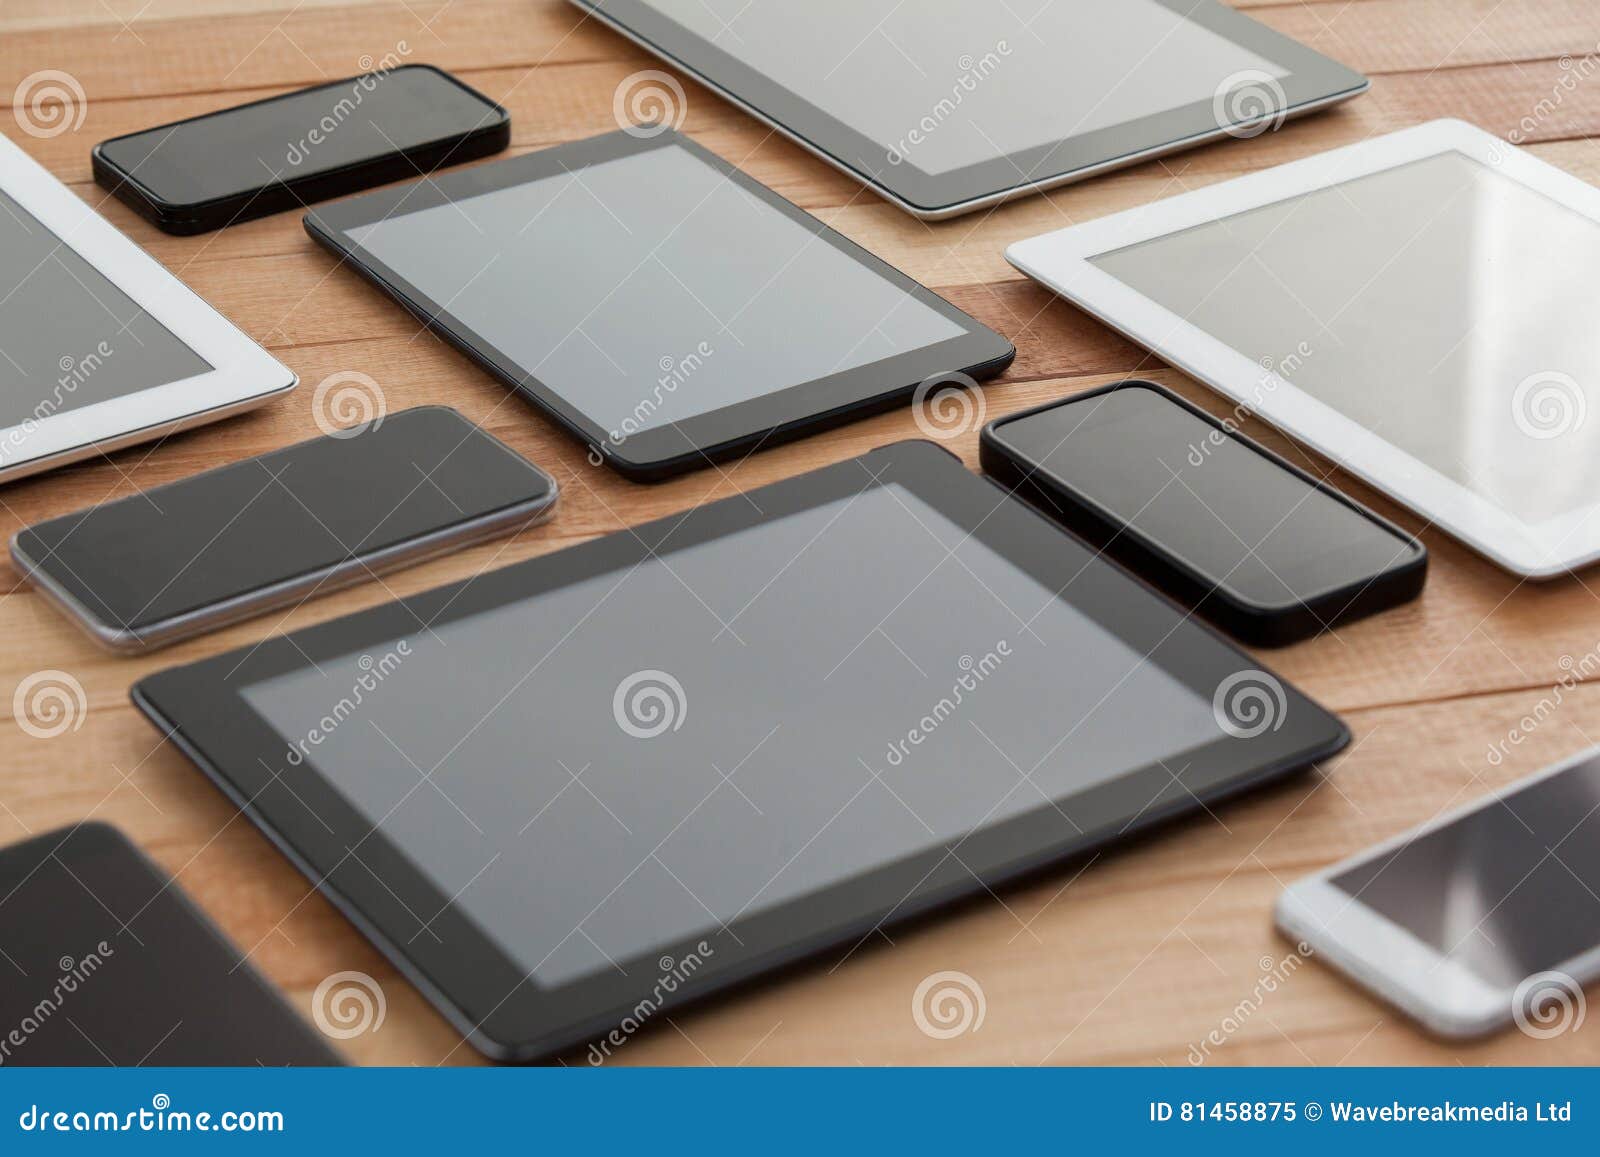 mobile phones and digital tablets on table